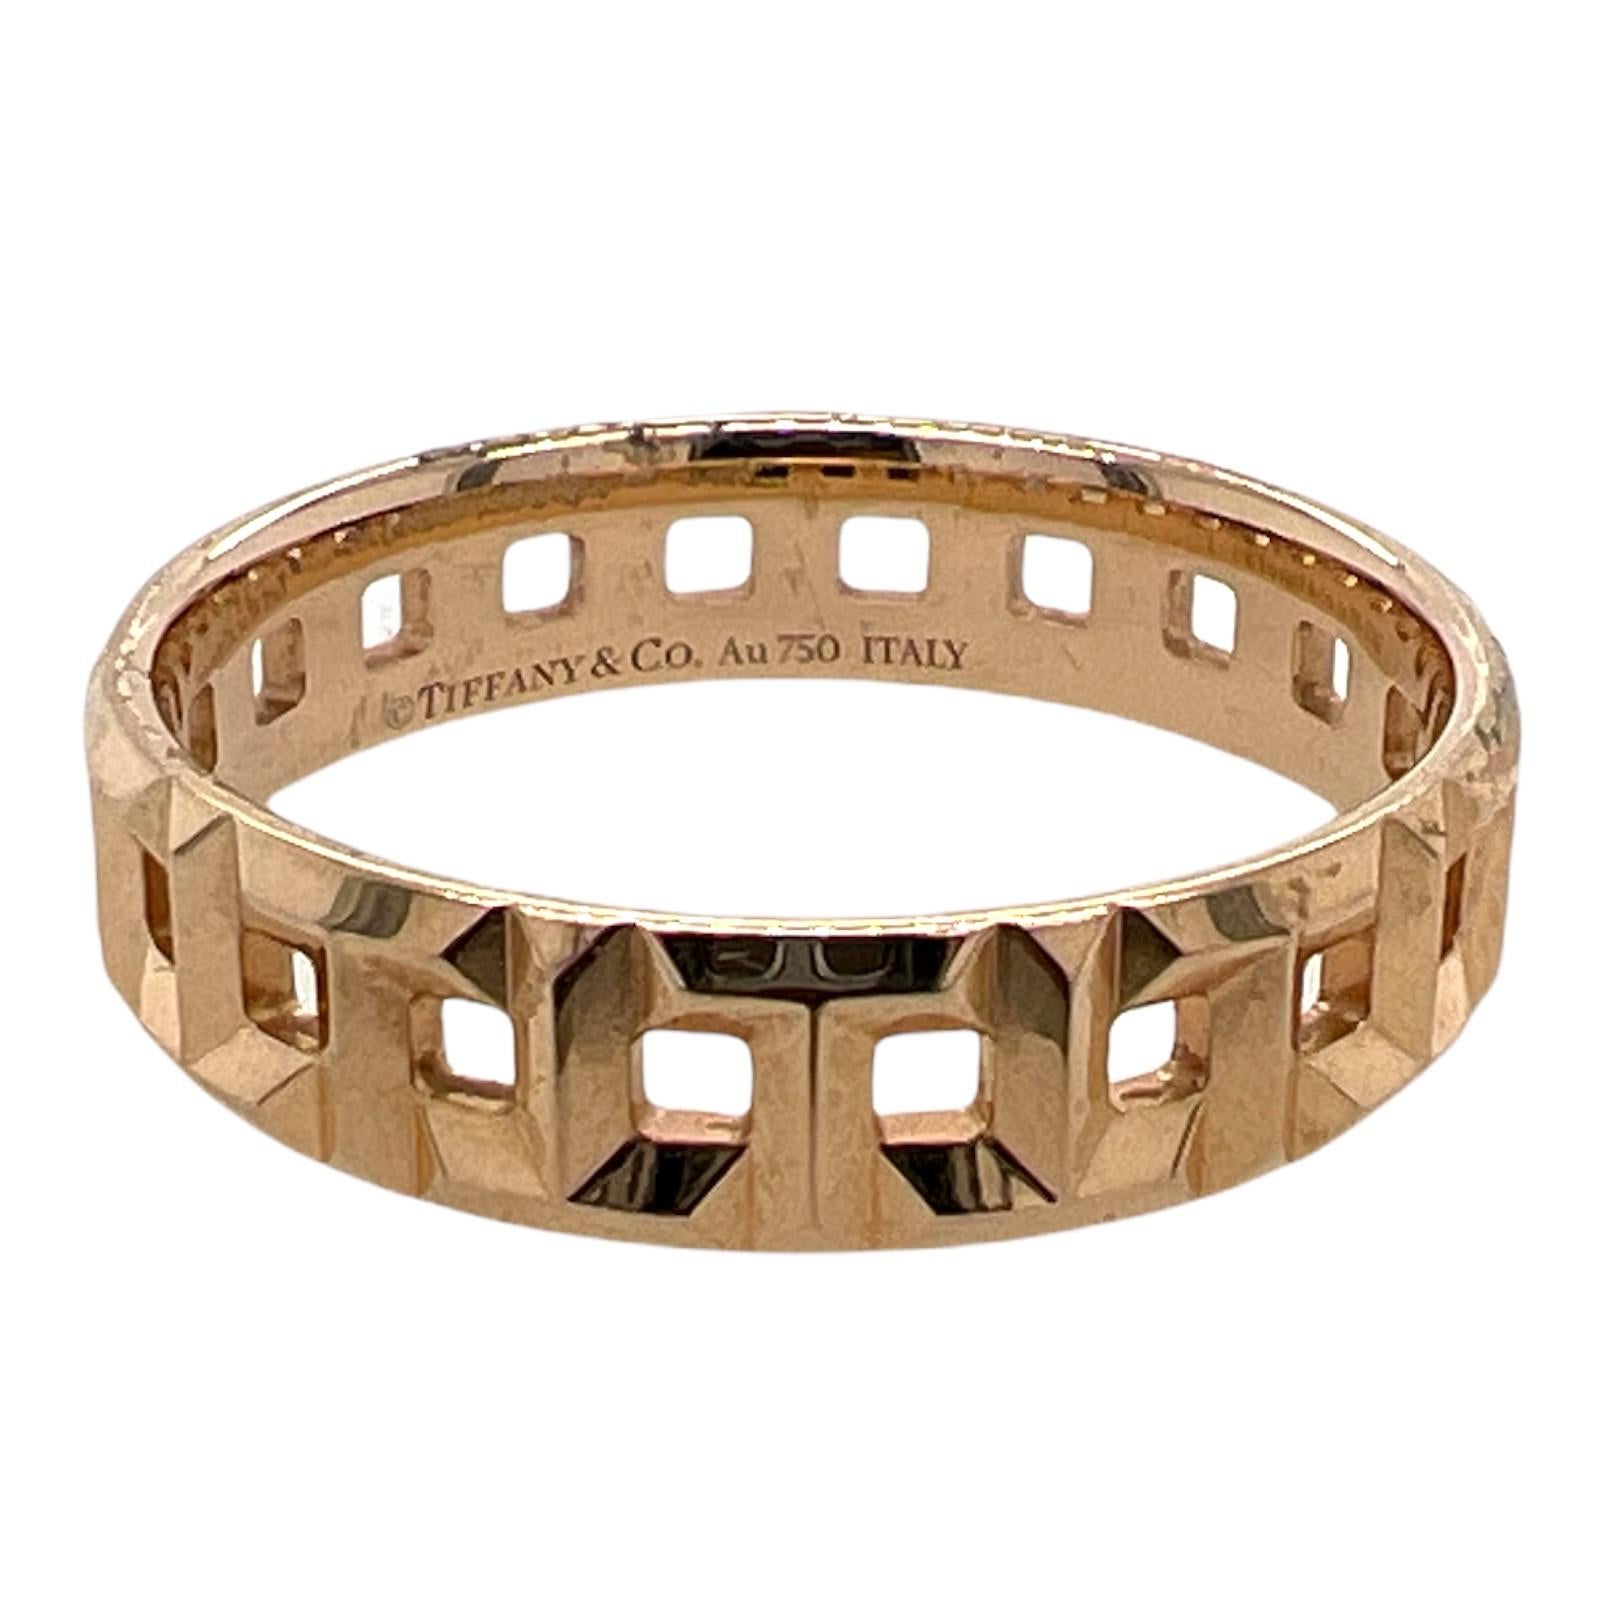 Men's Tiffany & Co. T True wedding band fashioned in 18 karat rose gold. The intricate links of the ring make a capital T in an alternating pattern. The ring measures 5.5 mm in width and is size 11.75. Signed Tiffany & Co. Au 750 Italy. 